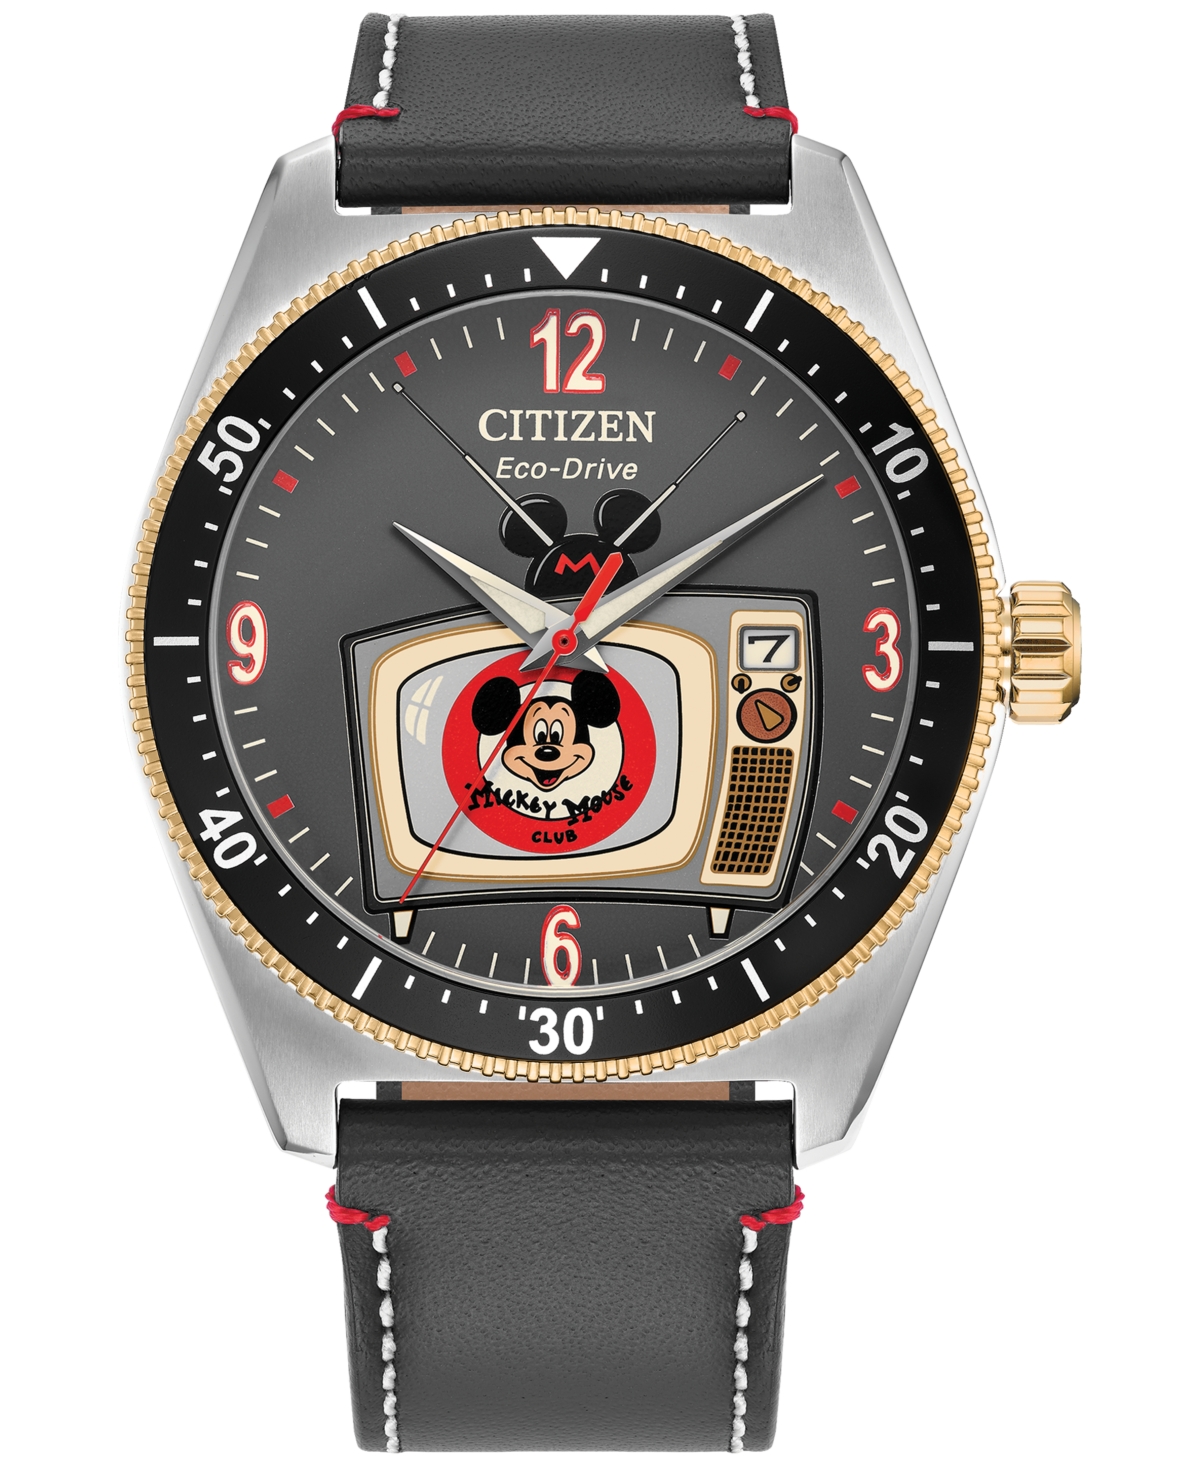 Citizen Eco-drive Men's Mickey Mouse Club Gray Leather Strap Watch 42mm Box Set